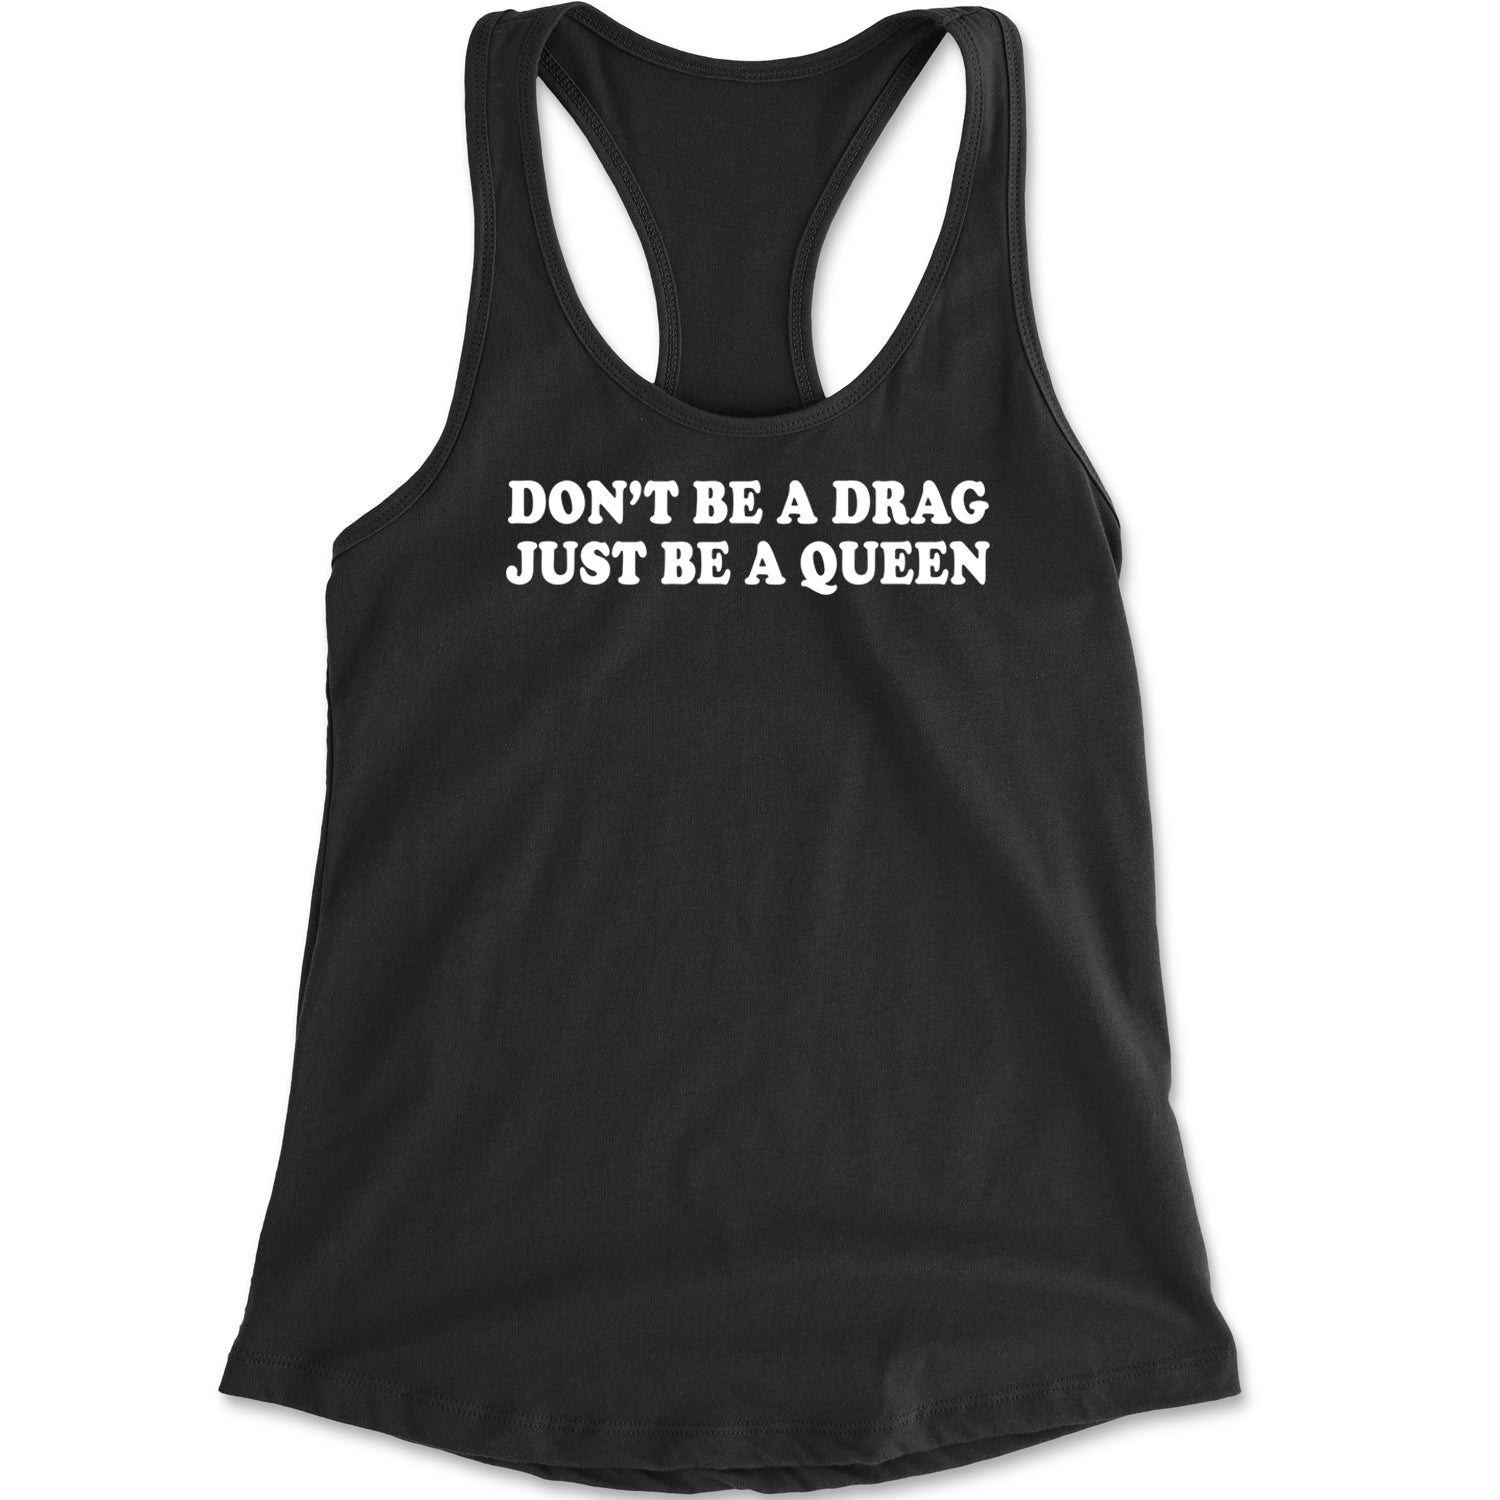 Don't Be A Drag, Just Be A Queen Pride Racerback Tank Top for Women